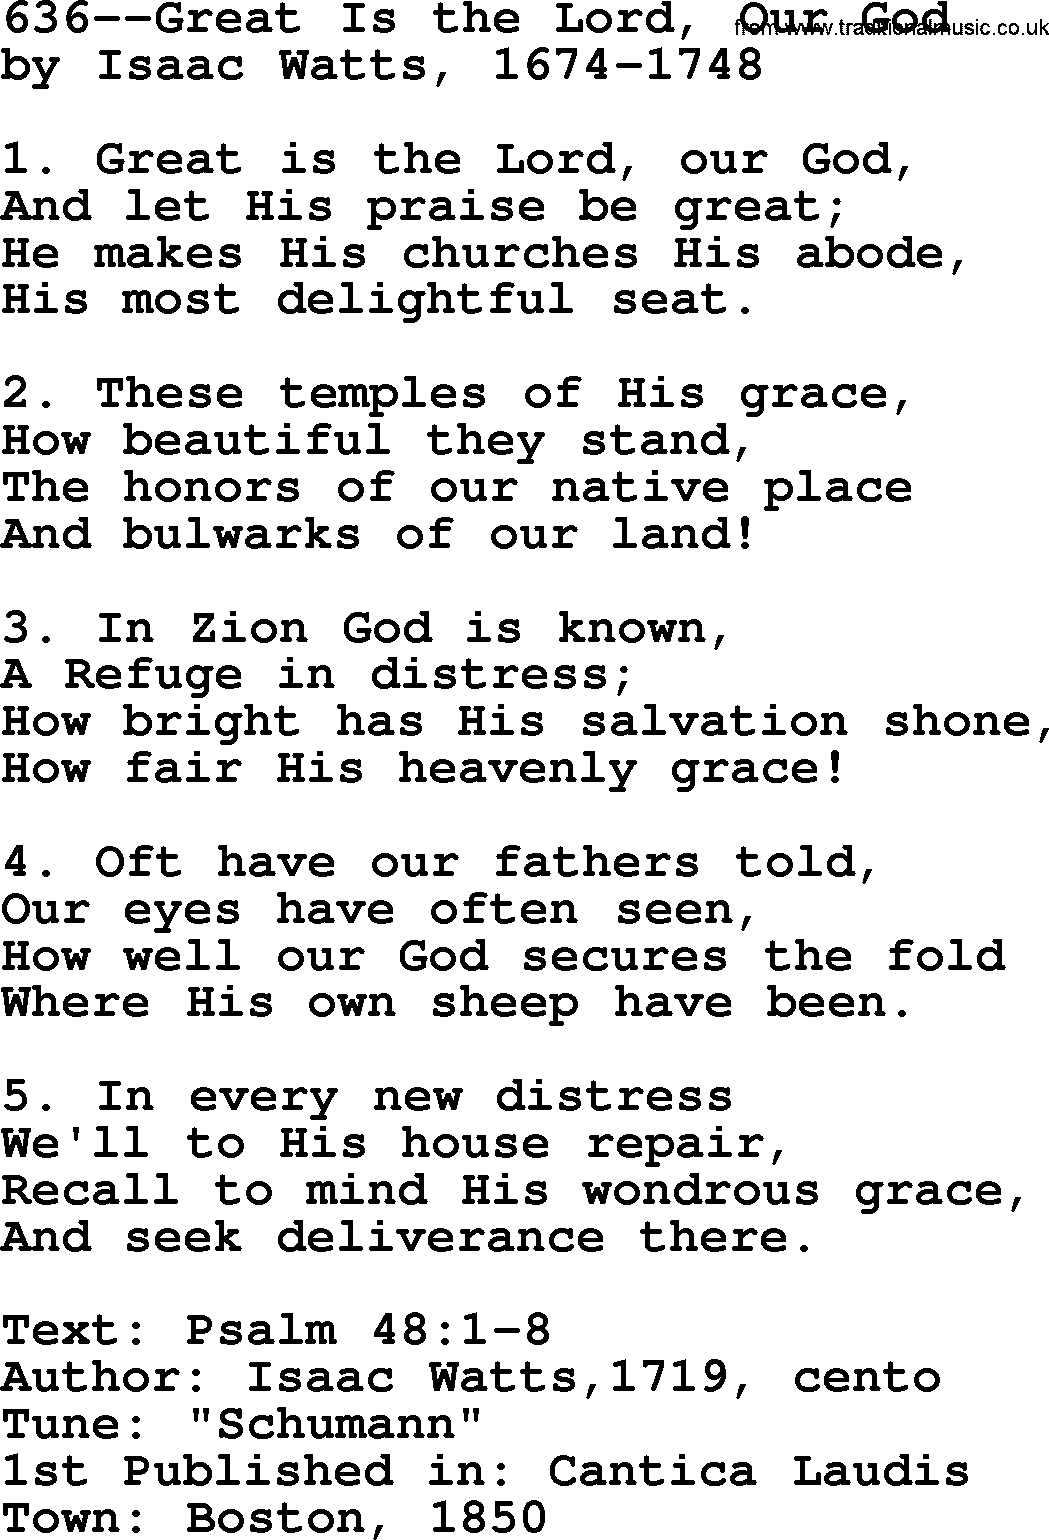 Lutheran Hymn: 636--Great Is the Lord, Our God.txt lyrics with PDF